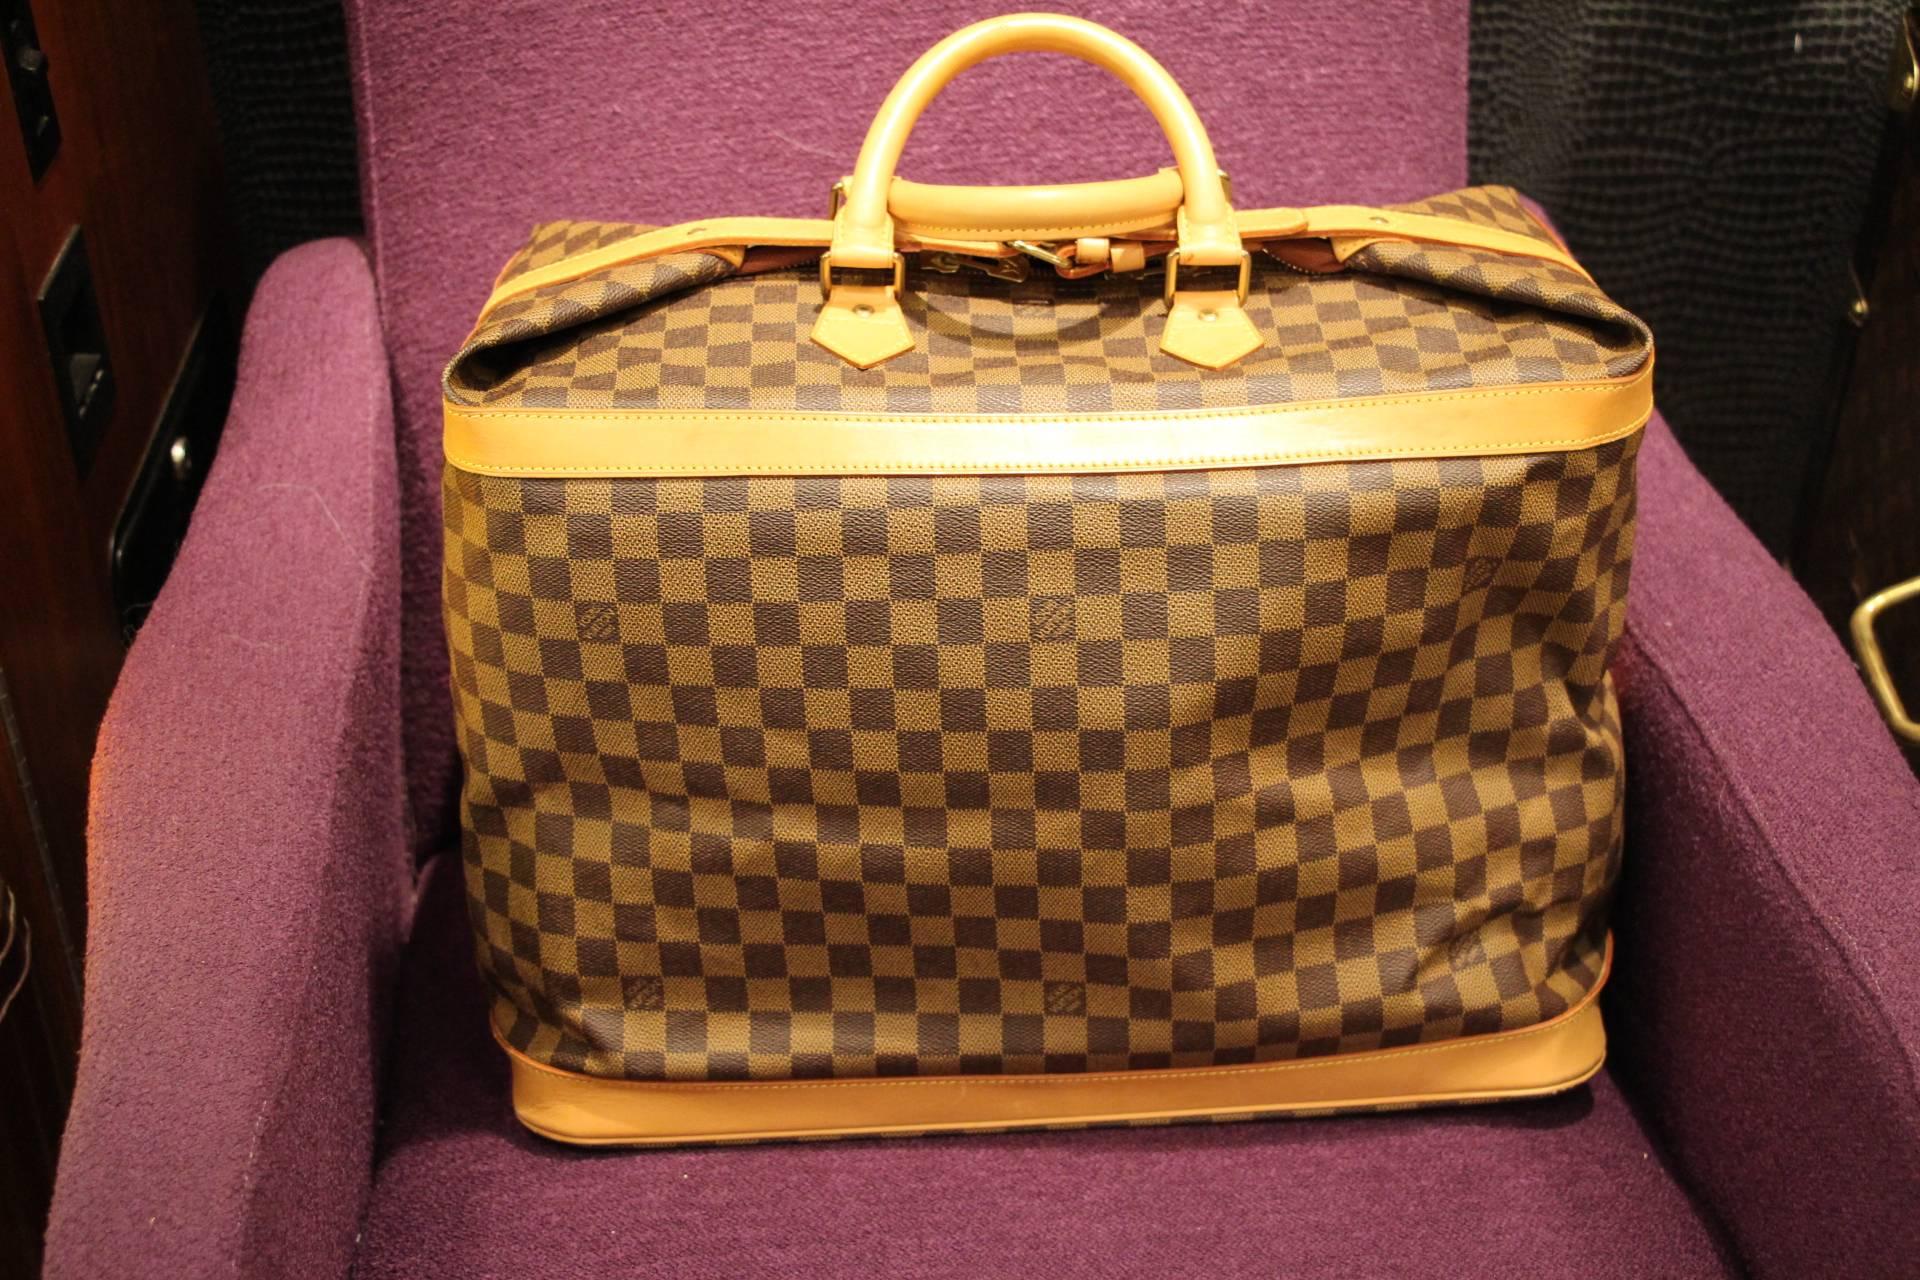 This beautiful Louis Vuitton damier travel bag is a special edition as it has been produced in 1996 to celebrate the 100th birthday of the Louis Vuitton's monogramm pattern.
This is a highly collectible Louis Vuitton Damier travel bag edition